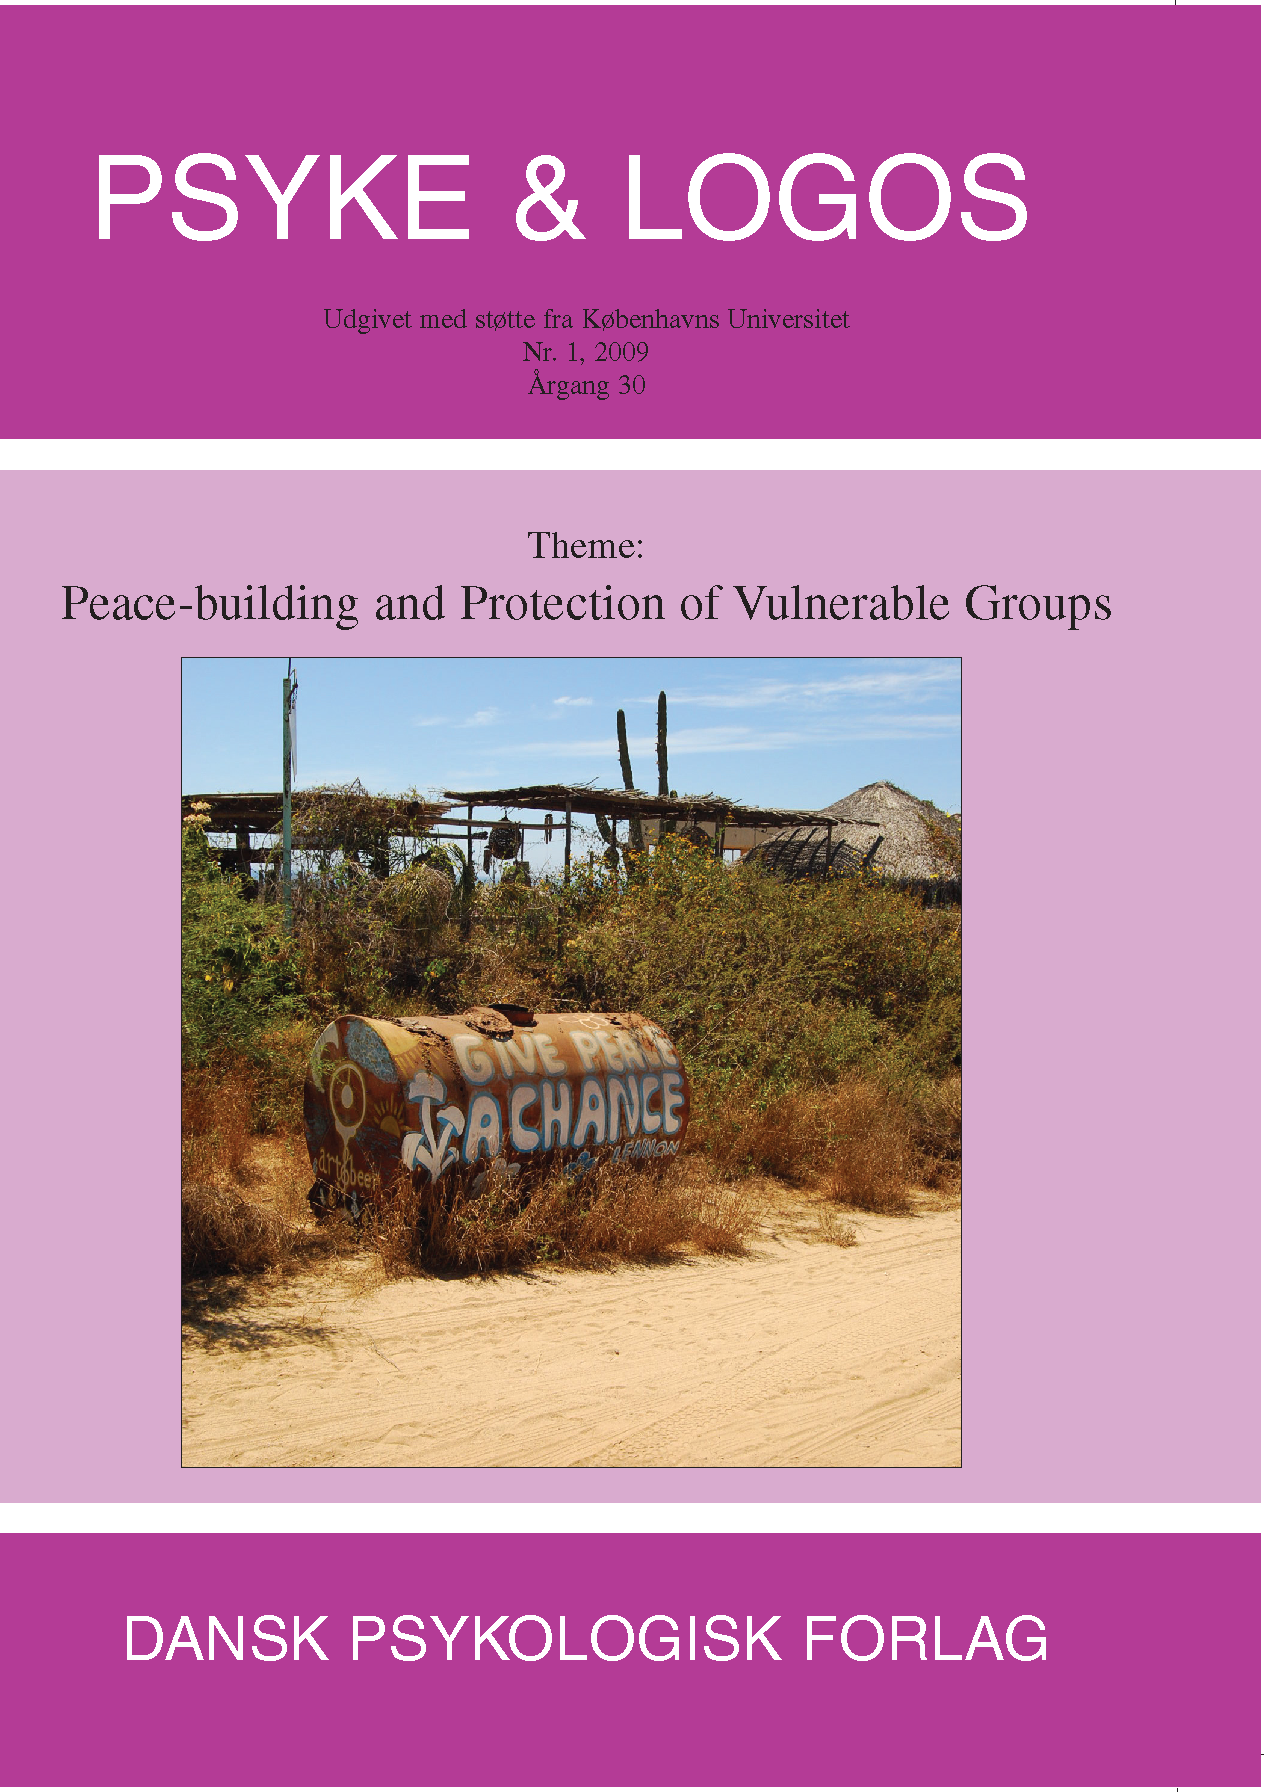 					Se Årg. 30 Nr. 1 (2009): Peace-building and Protection of Vulnerable Groups
				